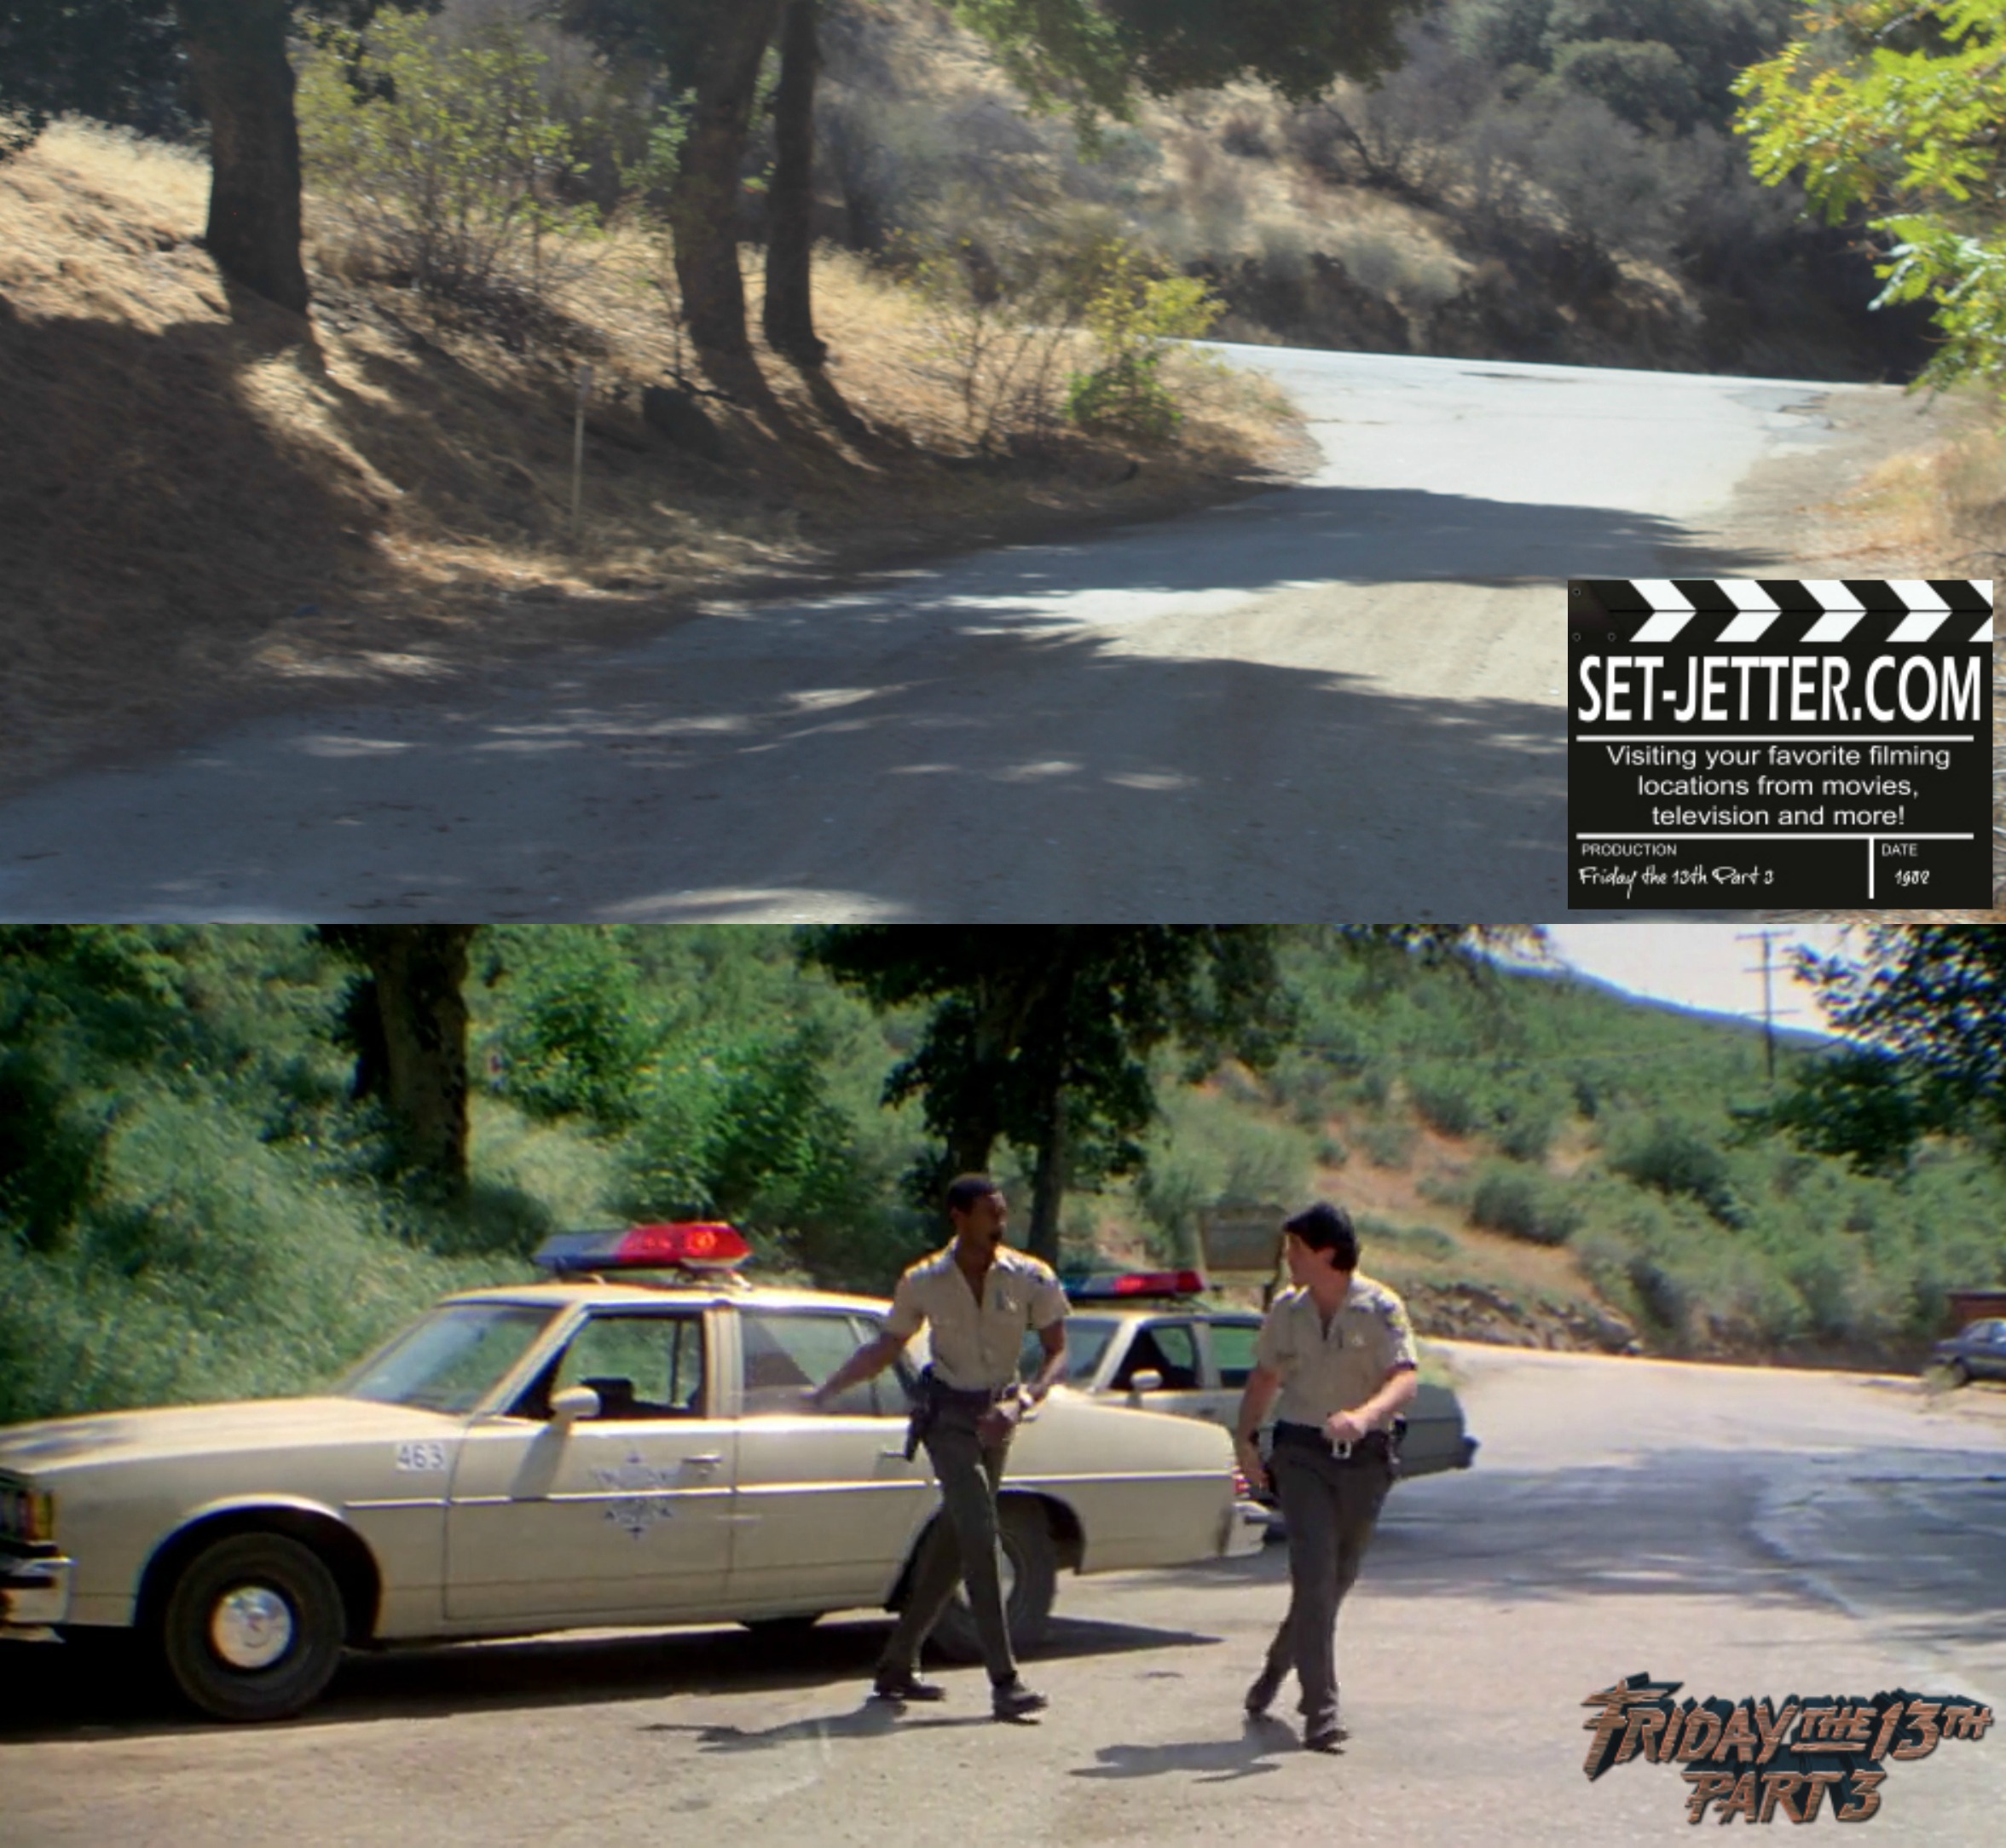 Friday the 13th Part 3 comparison 217.jpg